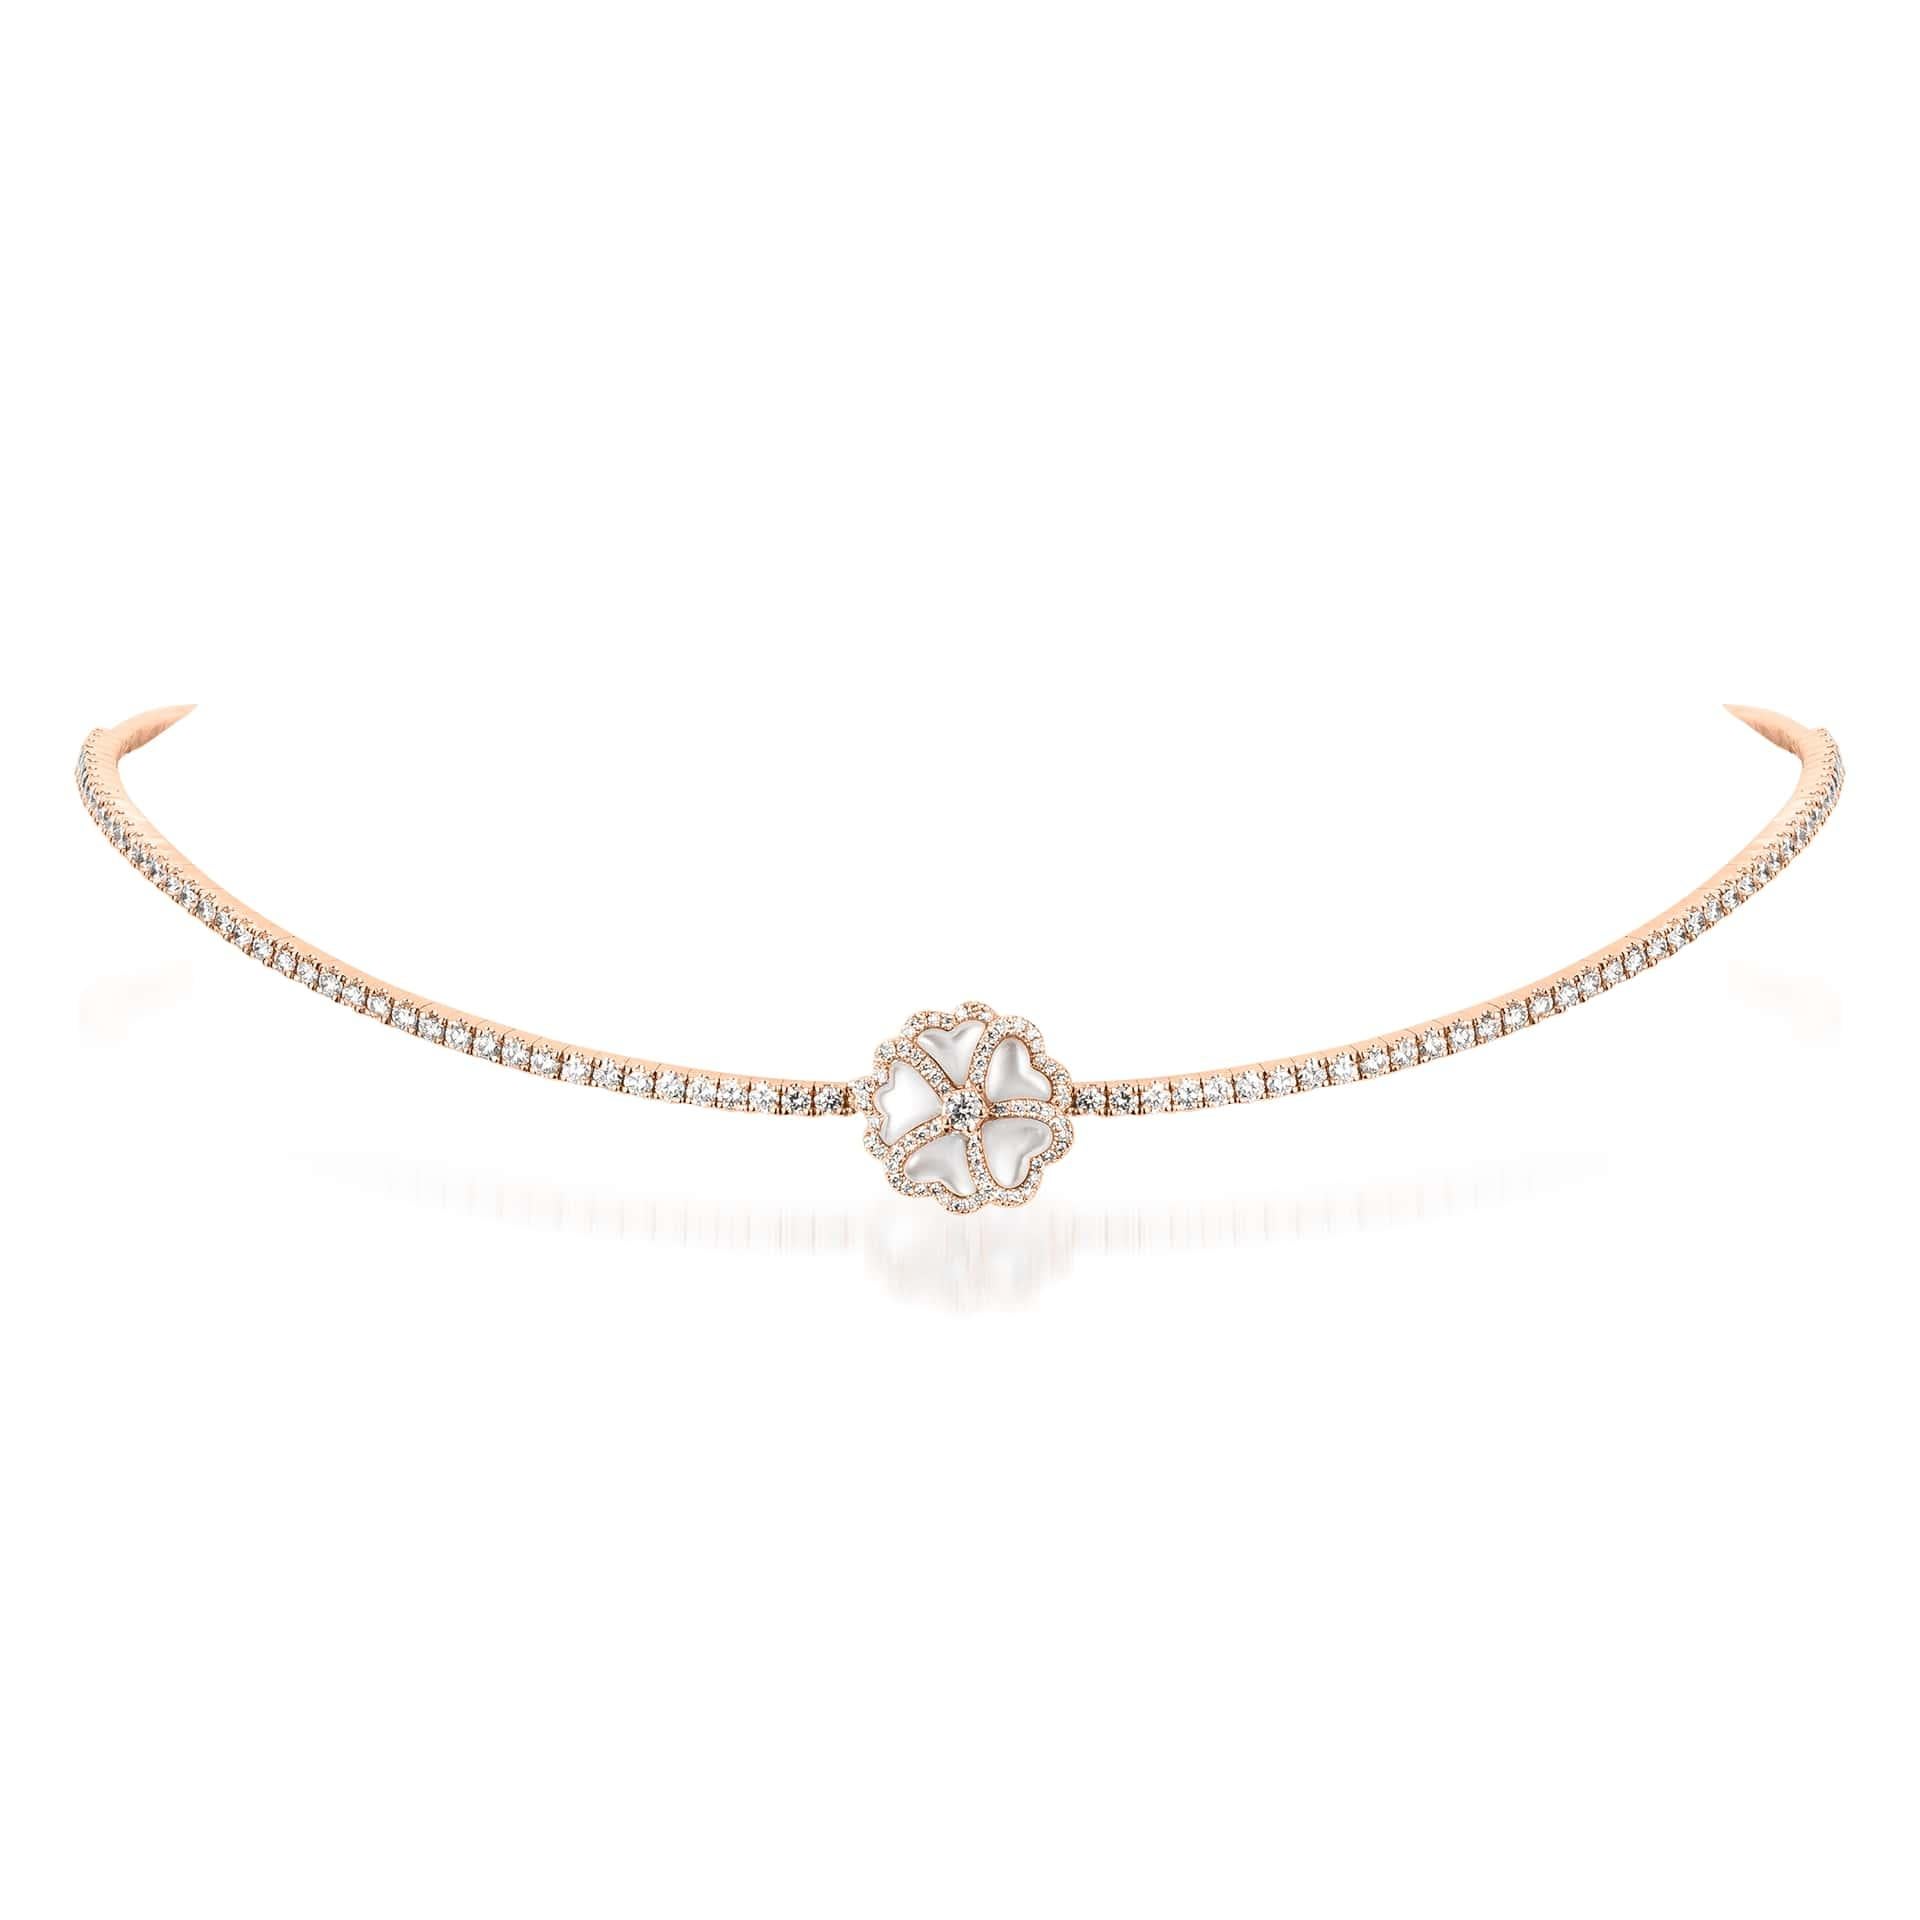 Bloom Diamond and Mother-of-Pearl Flower Choker Necklace in 18K Rose Gold

Inspired by the exquisite petals of the alpine cinquefoil flower, the Bloom collection combines the richness of diamonds and precious metals with the light versatility of